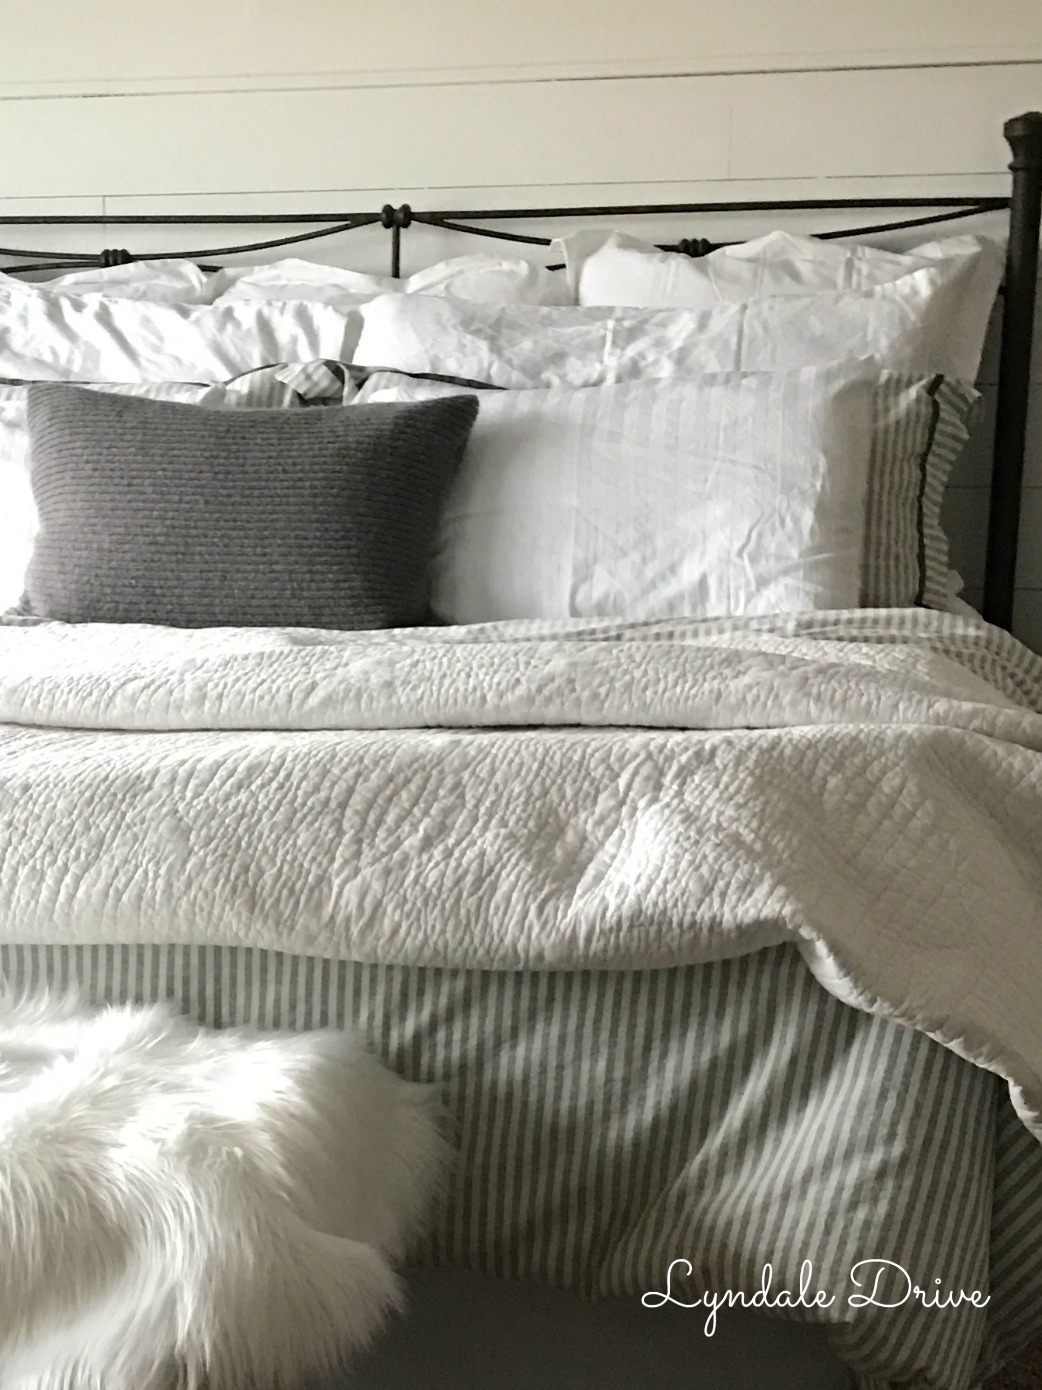 How to Keep Your White Sheets White